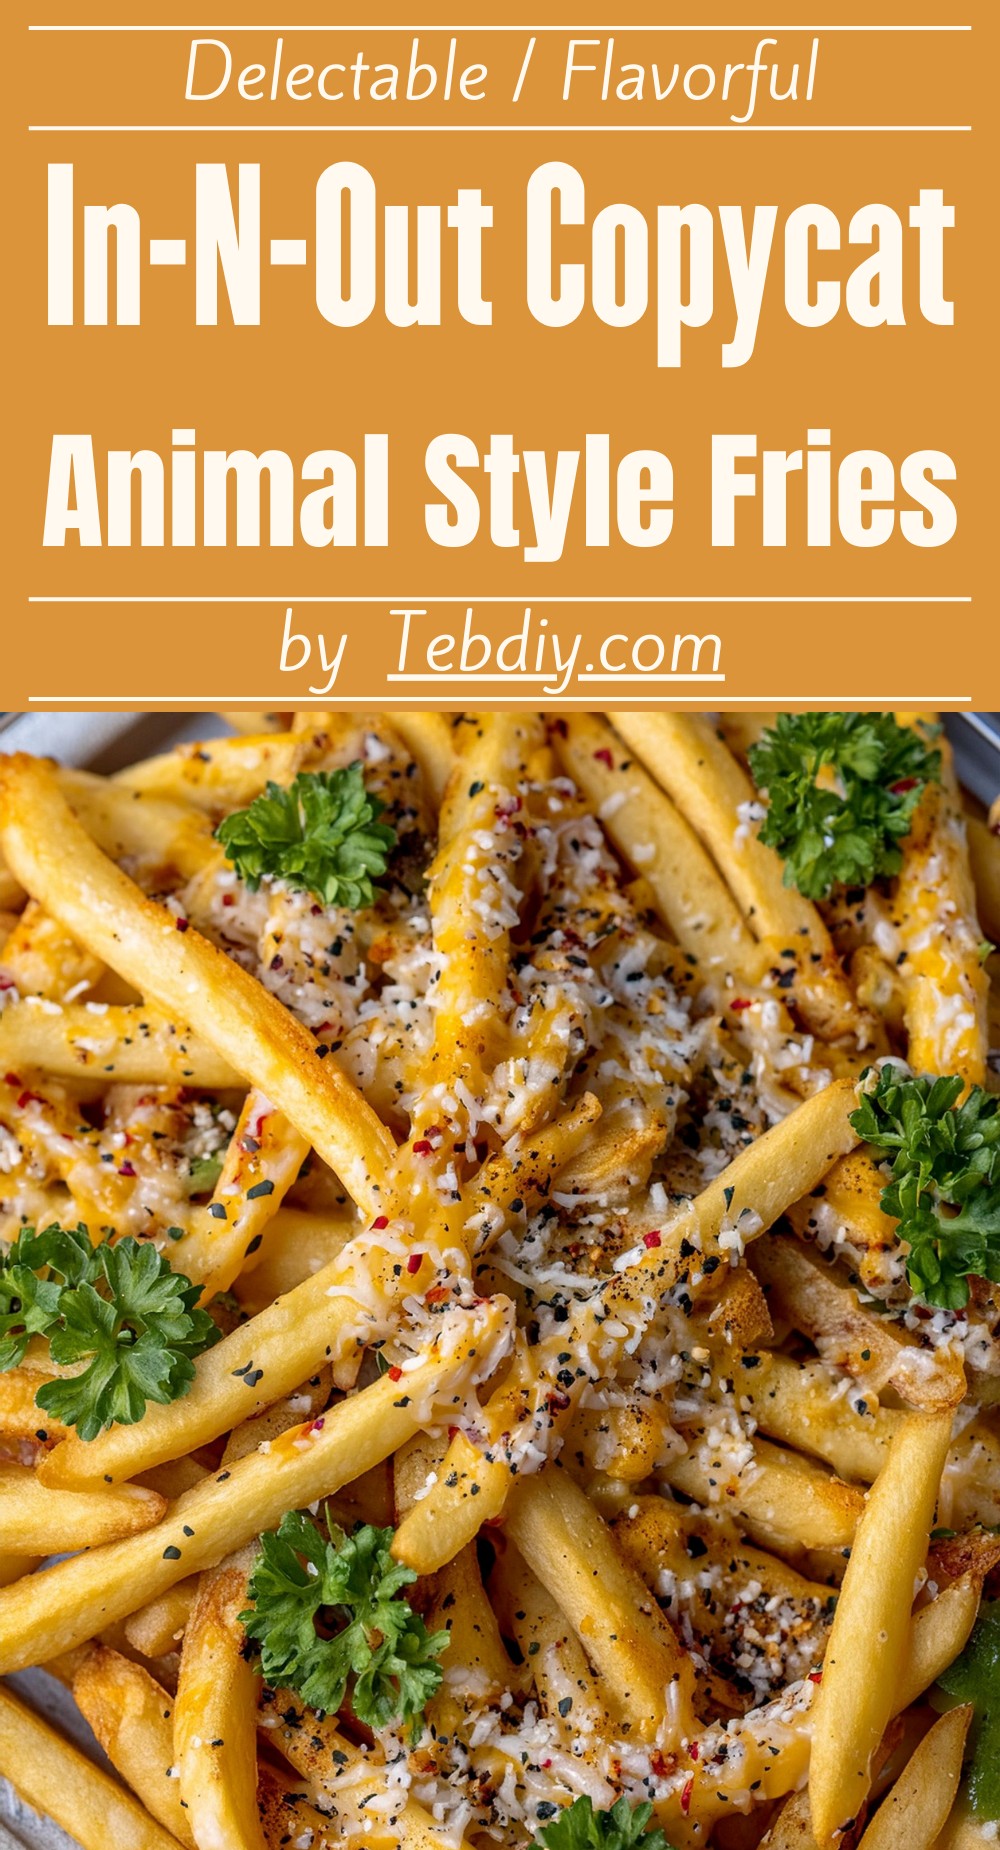 In-N-Out Copycat Animal Style Fries